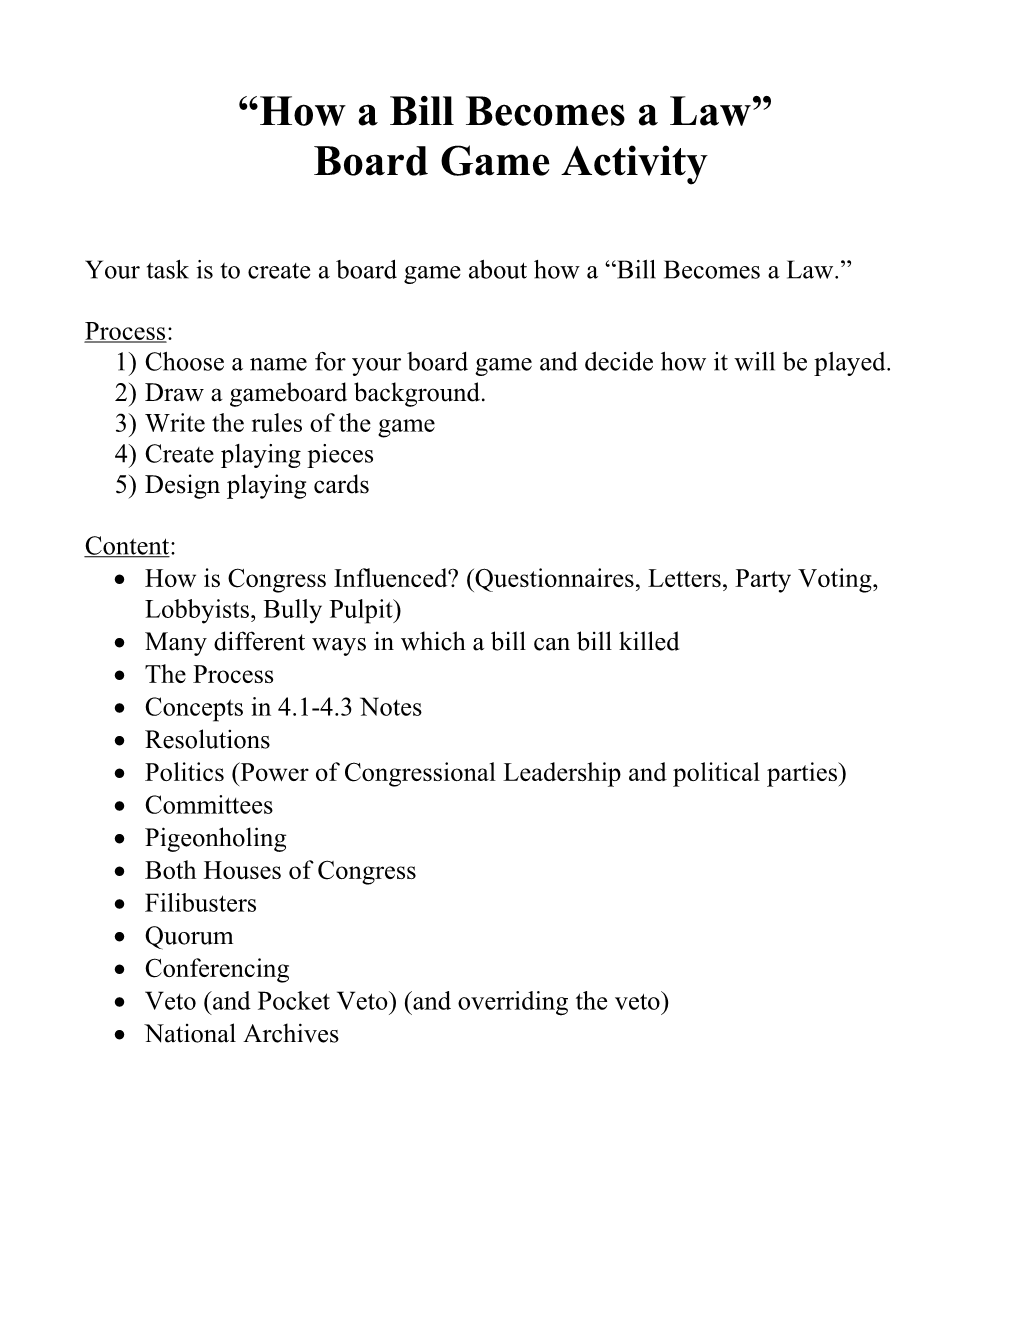 “How A Bill Becomes A Law” Board Game Activity